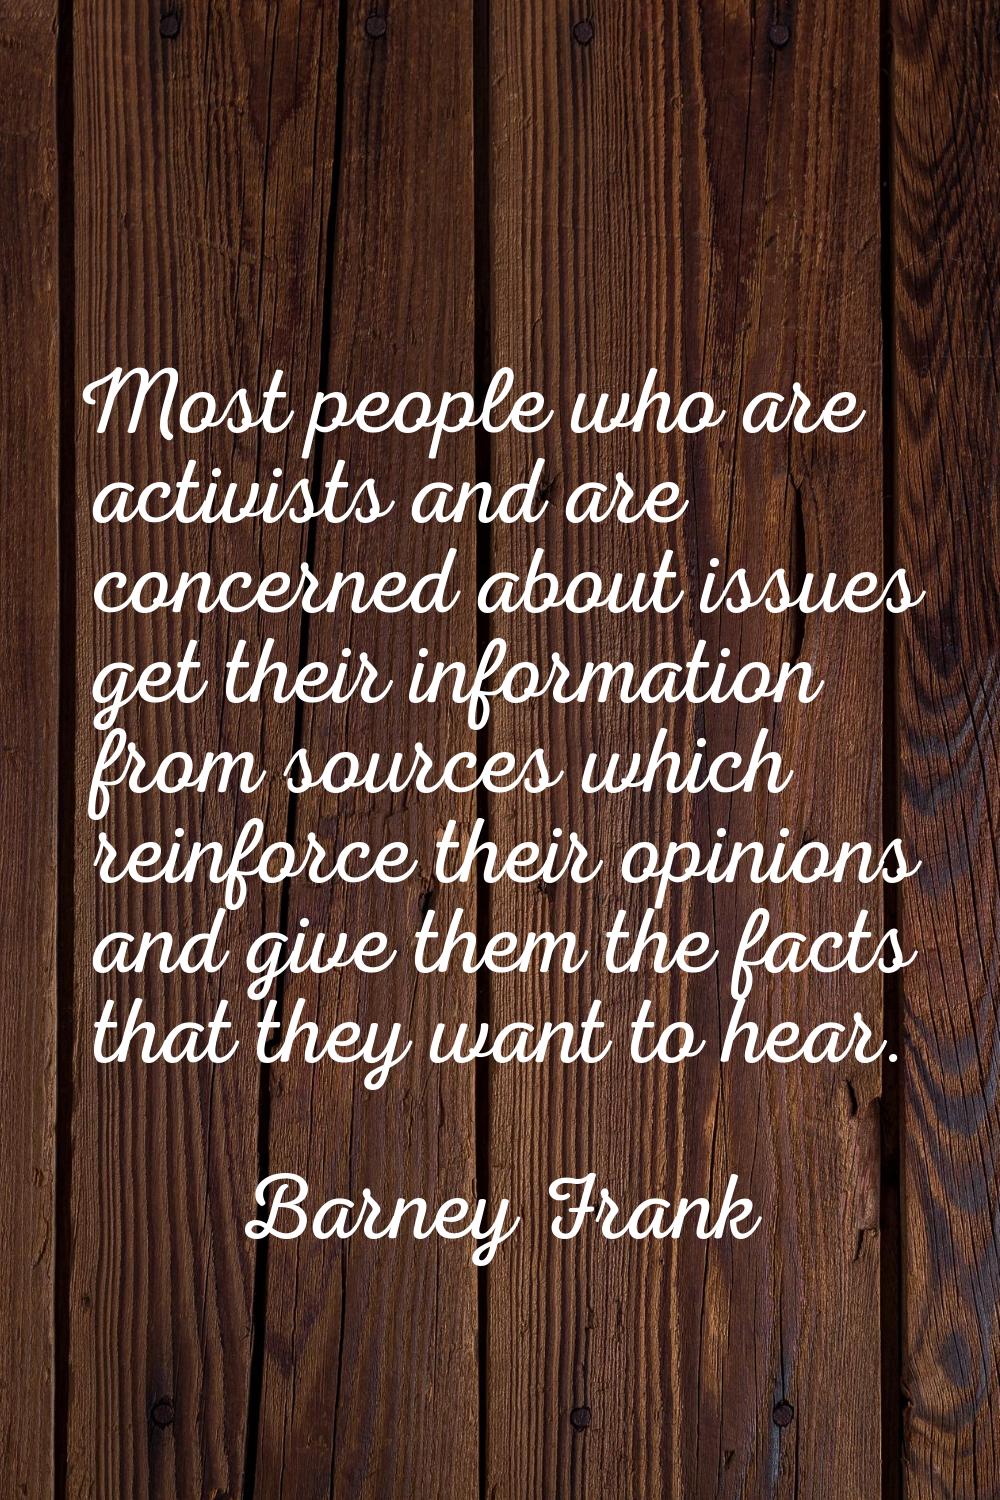 Most people who are activists and are concerned about issues get their information from sources whi